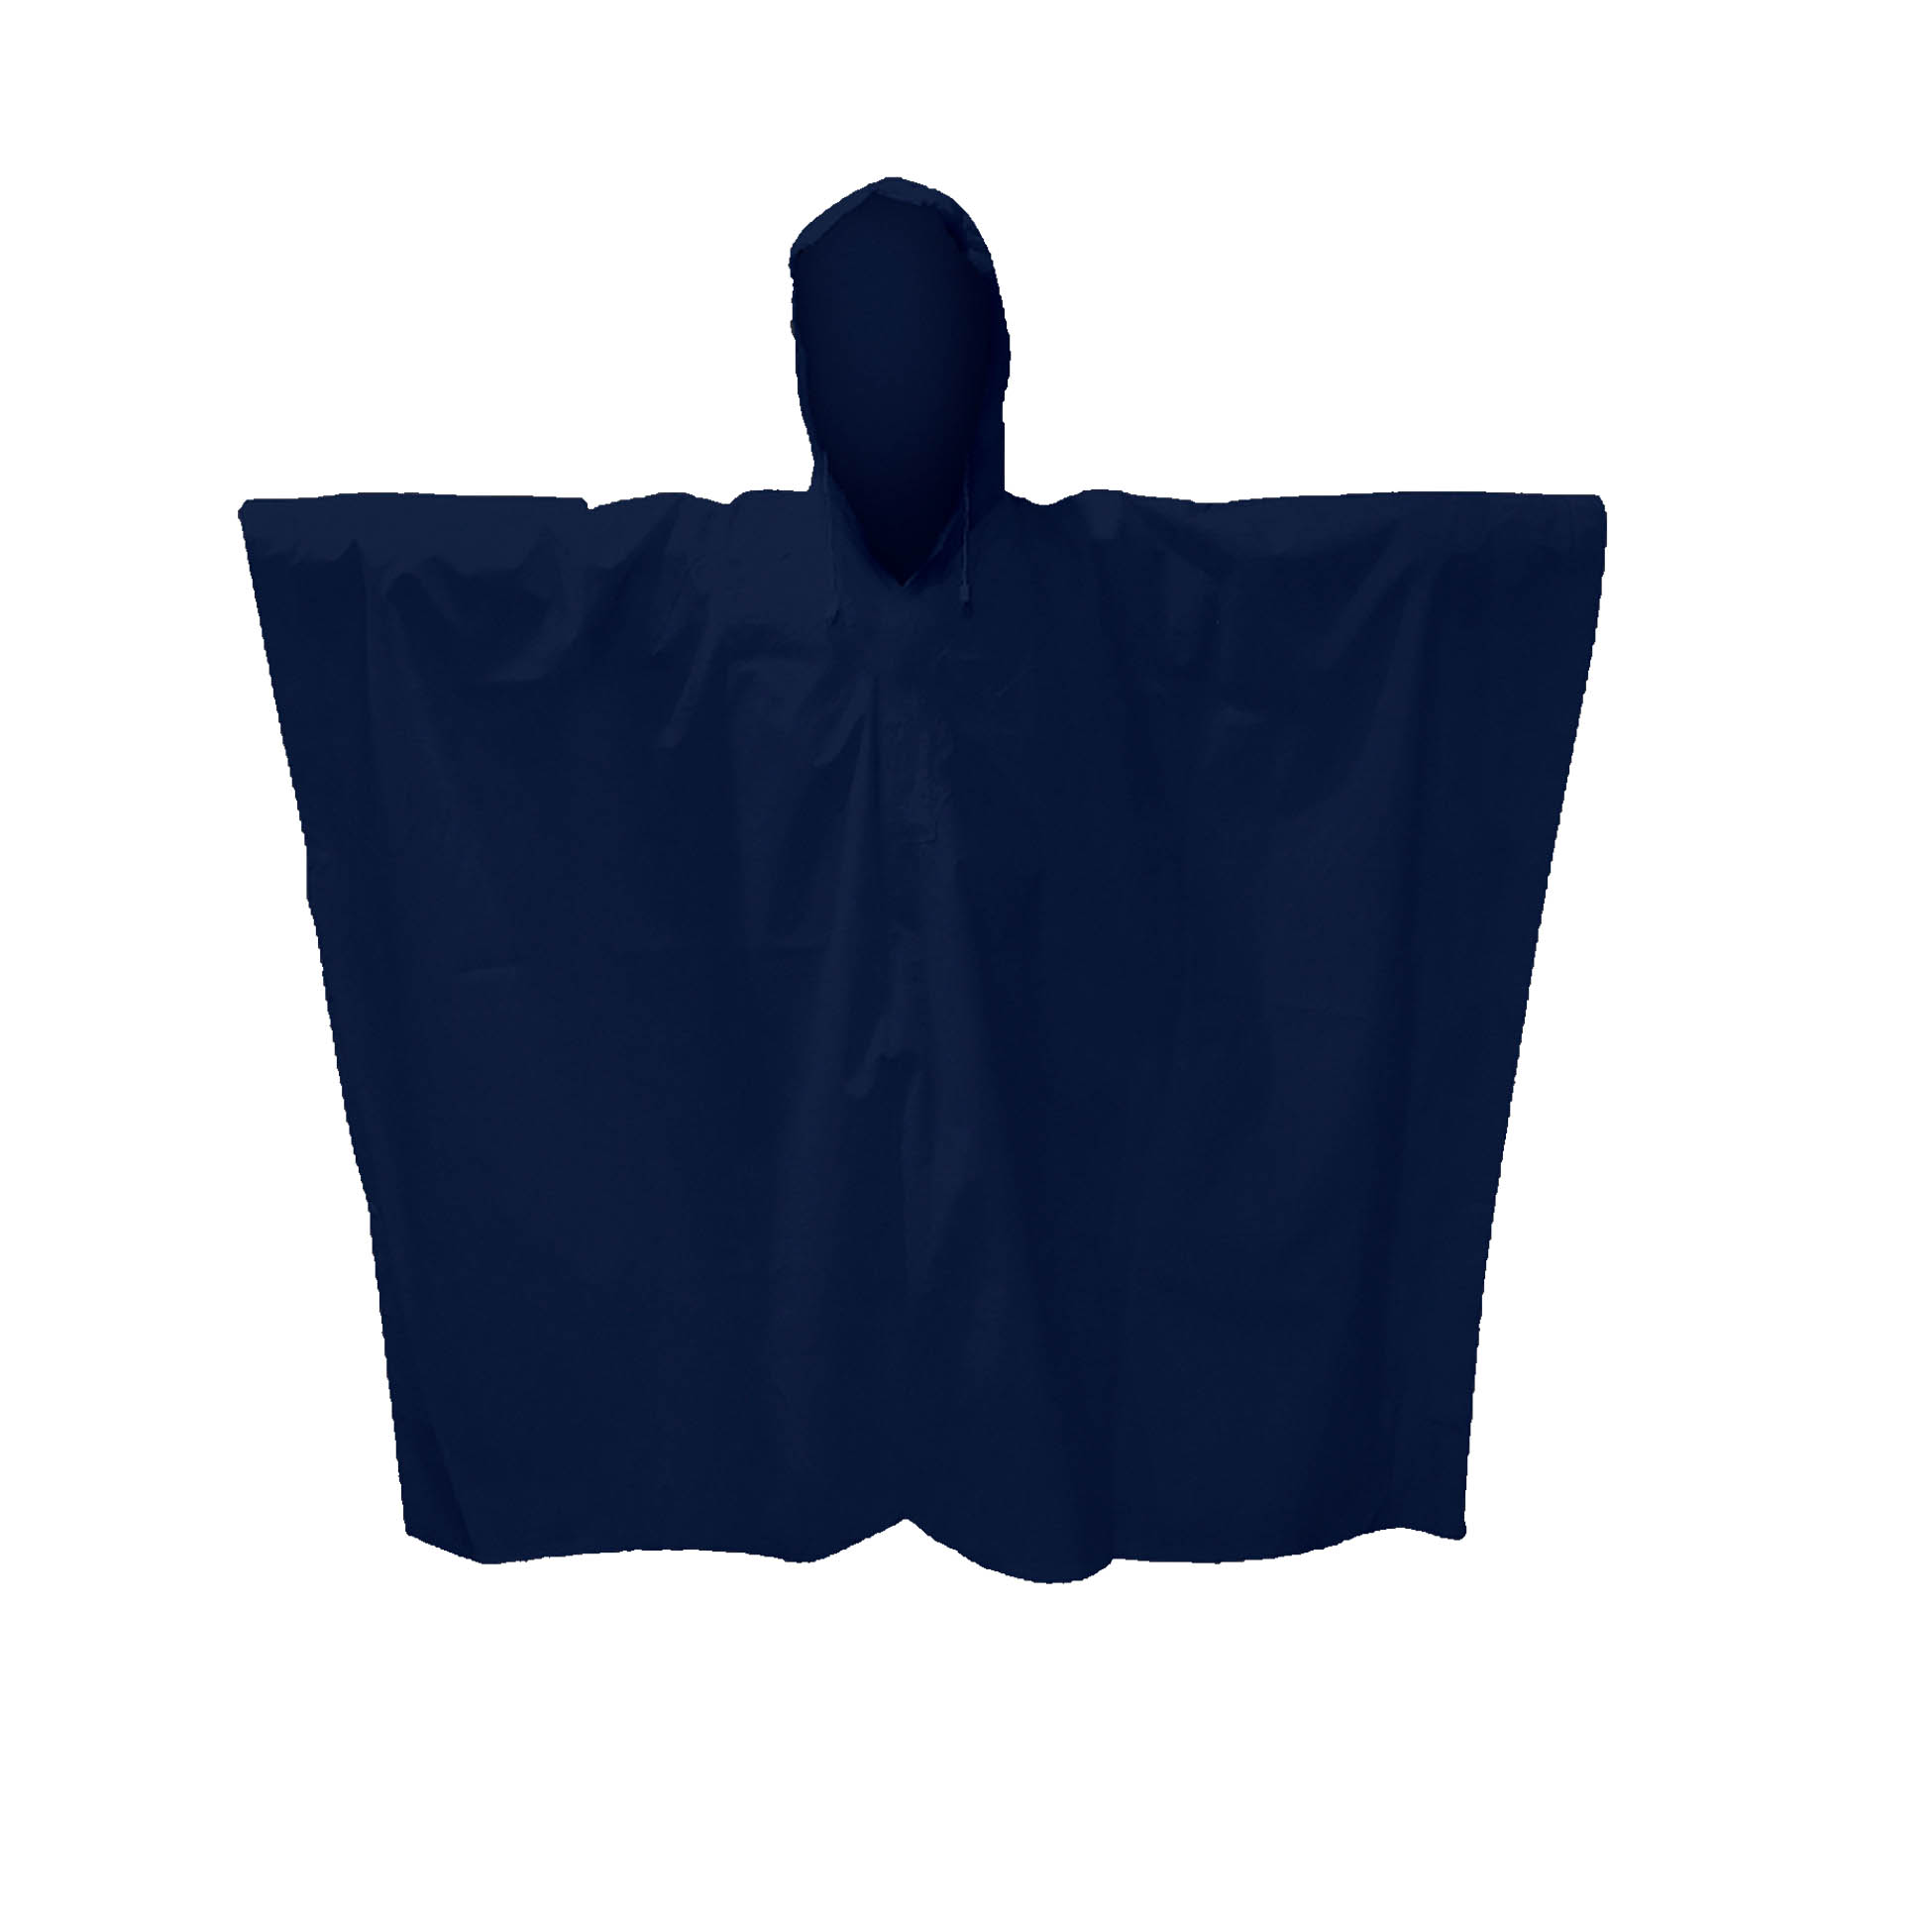 IMPERMEABLE TIPO PONCHO AZUL